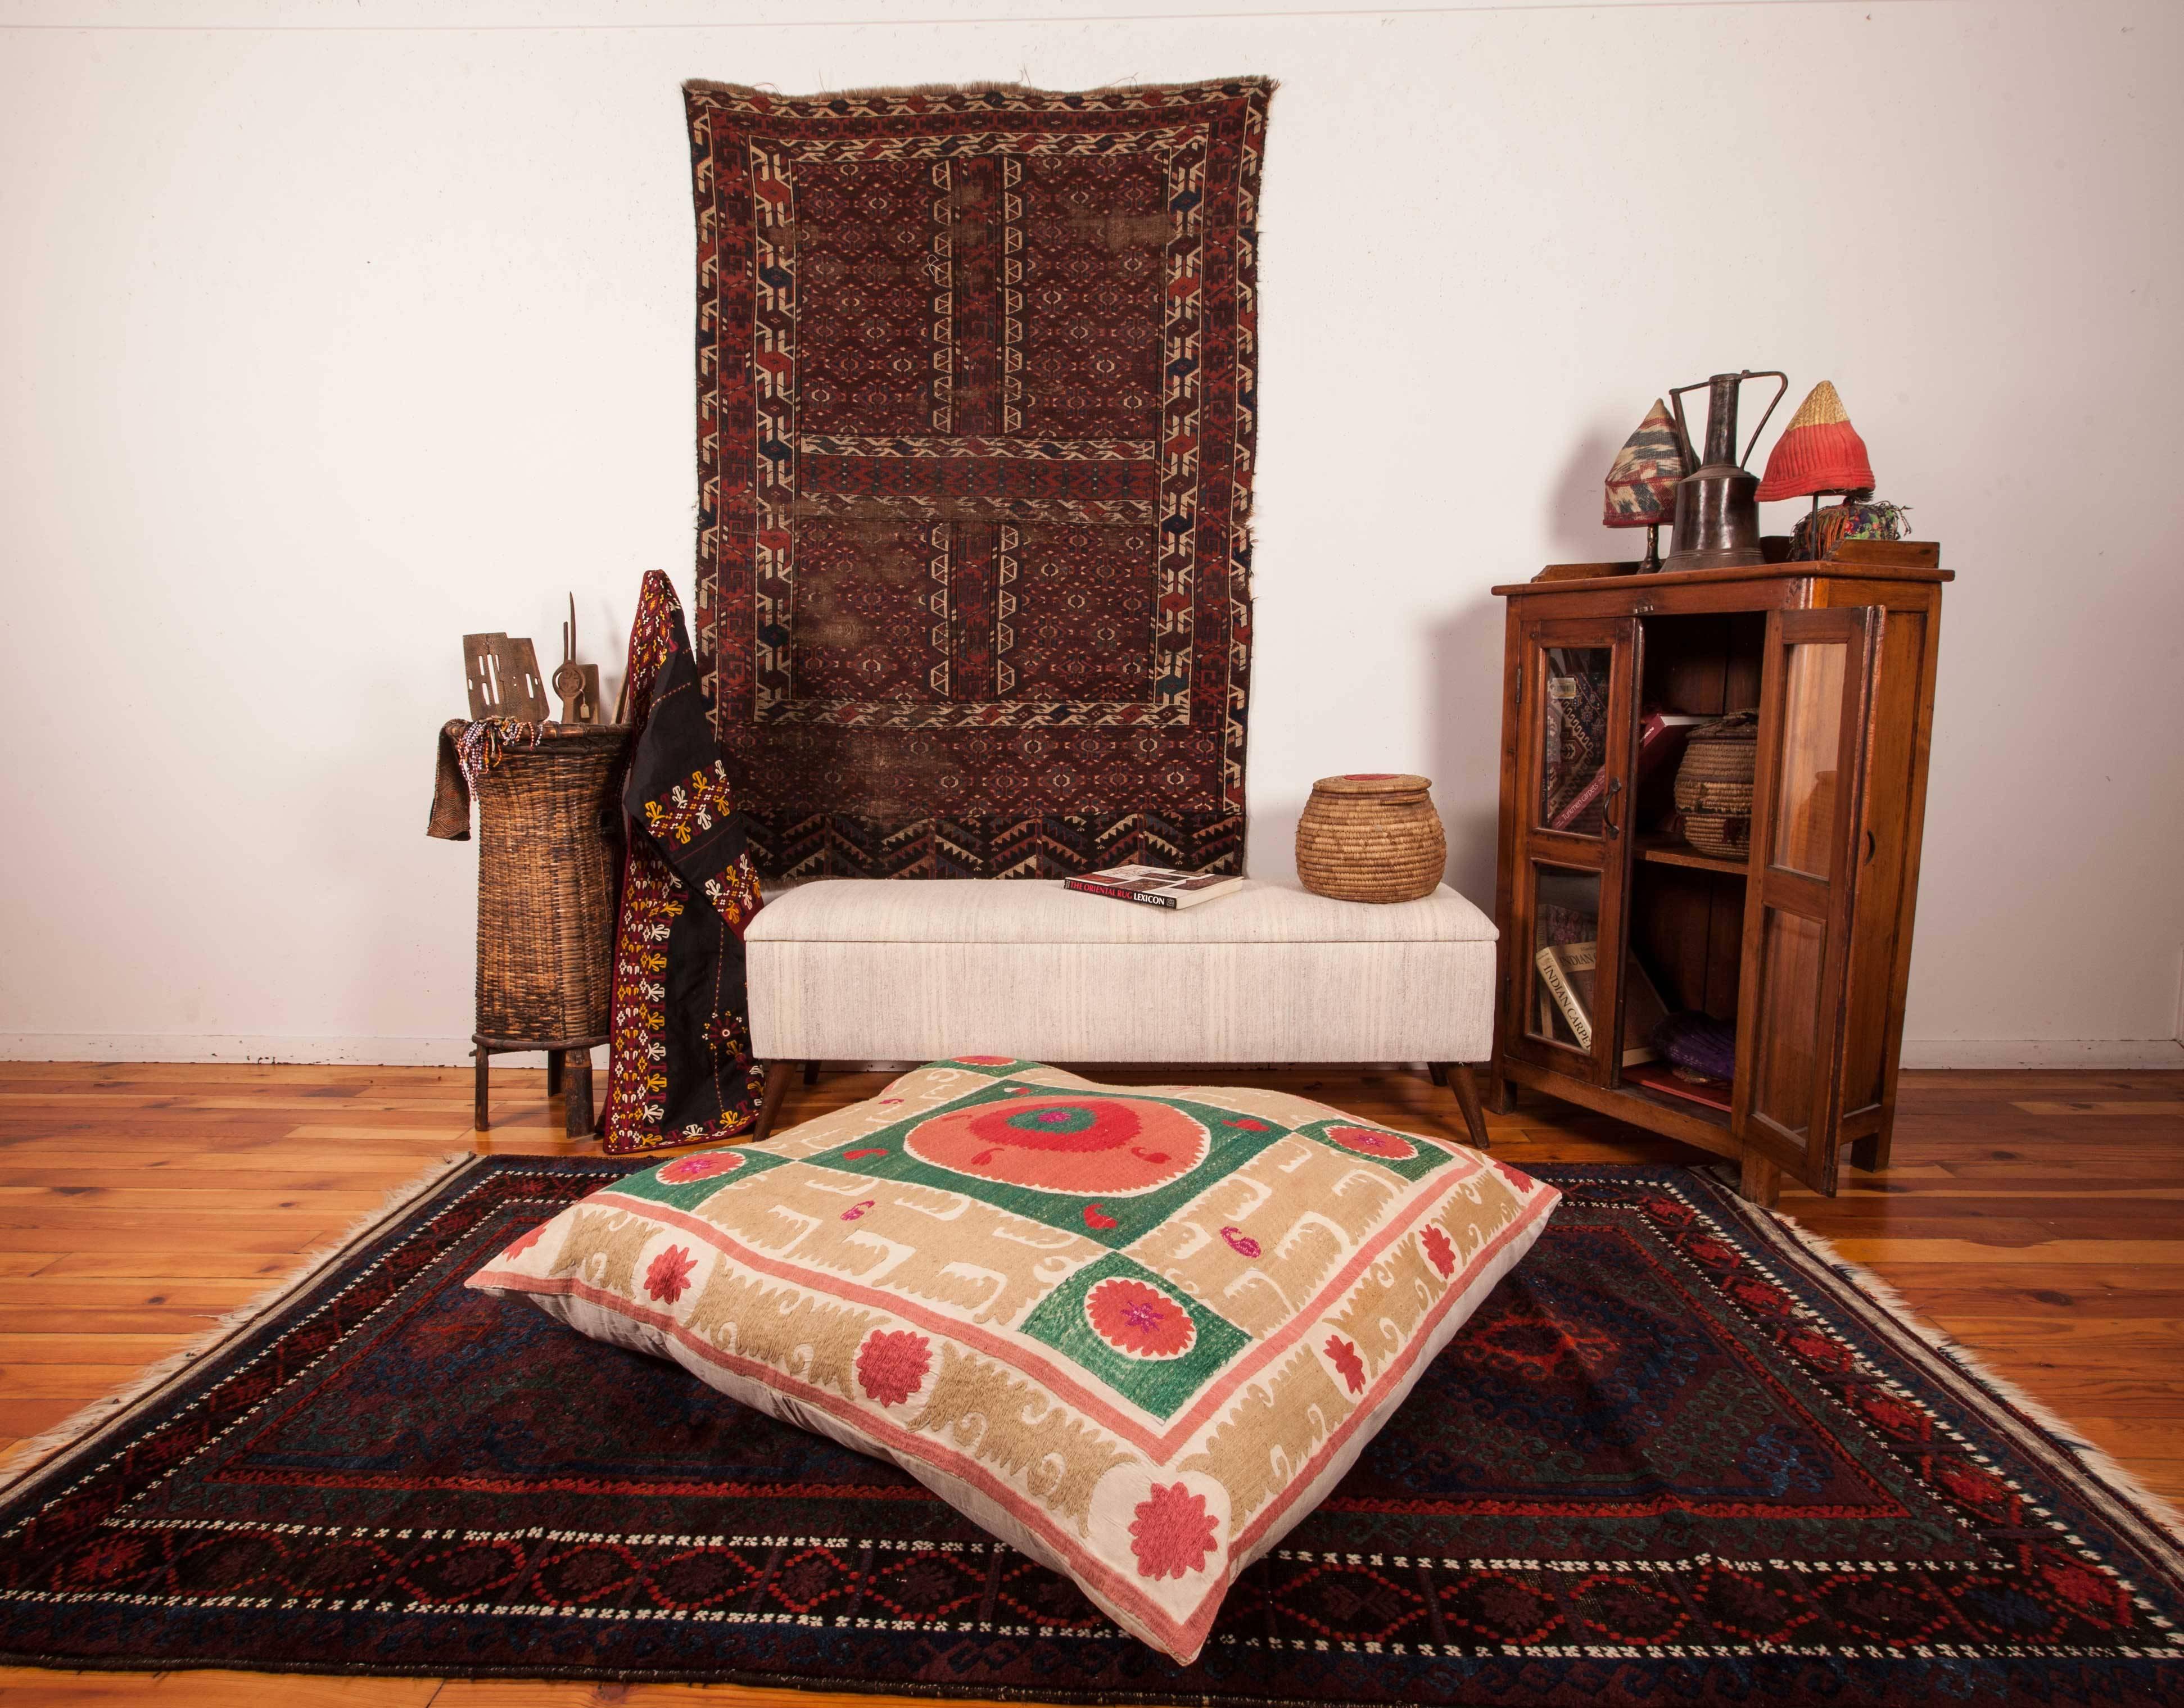 Embroidered Giant Floor Pillow Made from a Mid-20th Century Samarkand Suzani